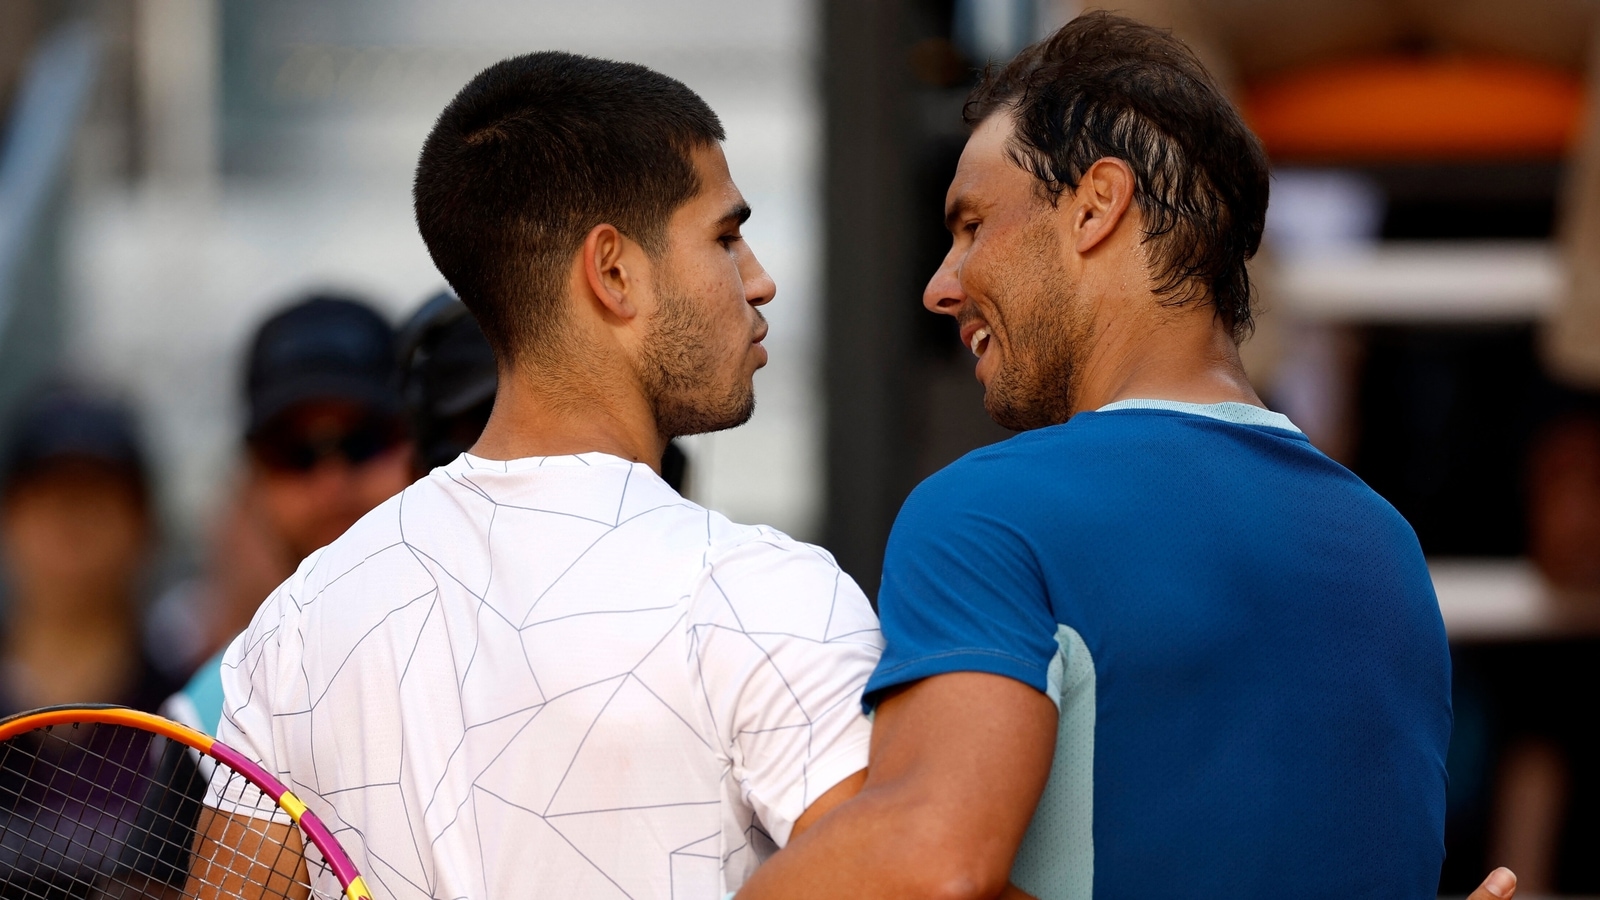 Change of guard? Alcaraz overpowers Nadal at Madrid Open Tennis News